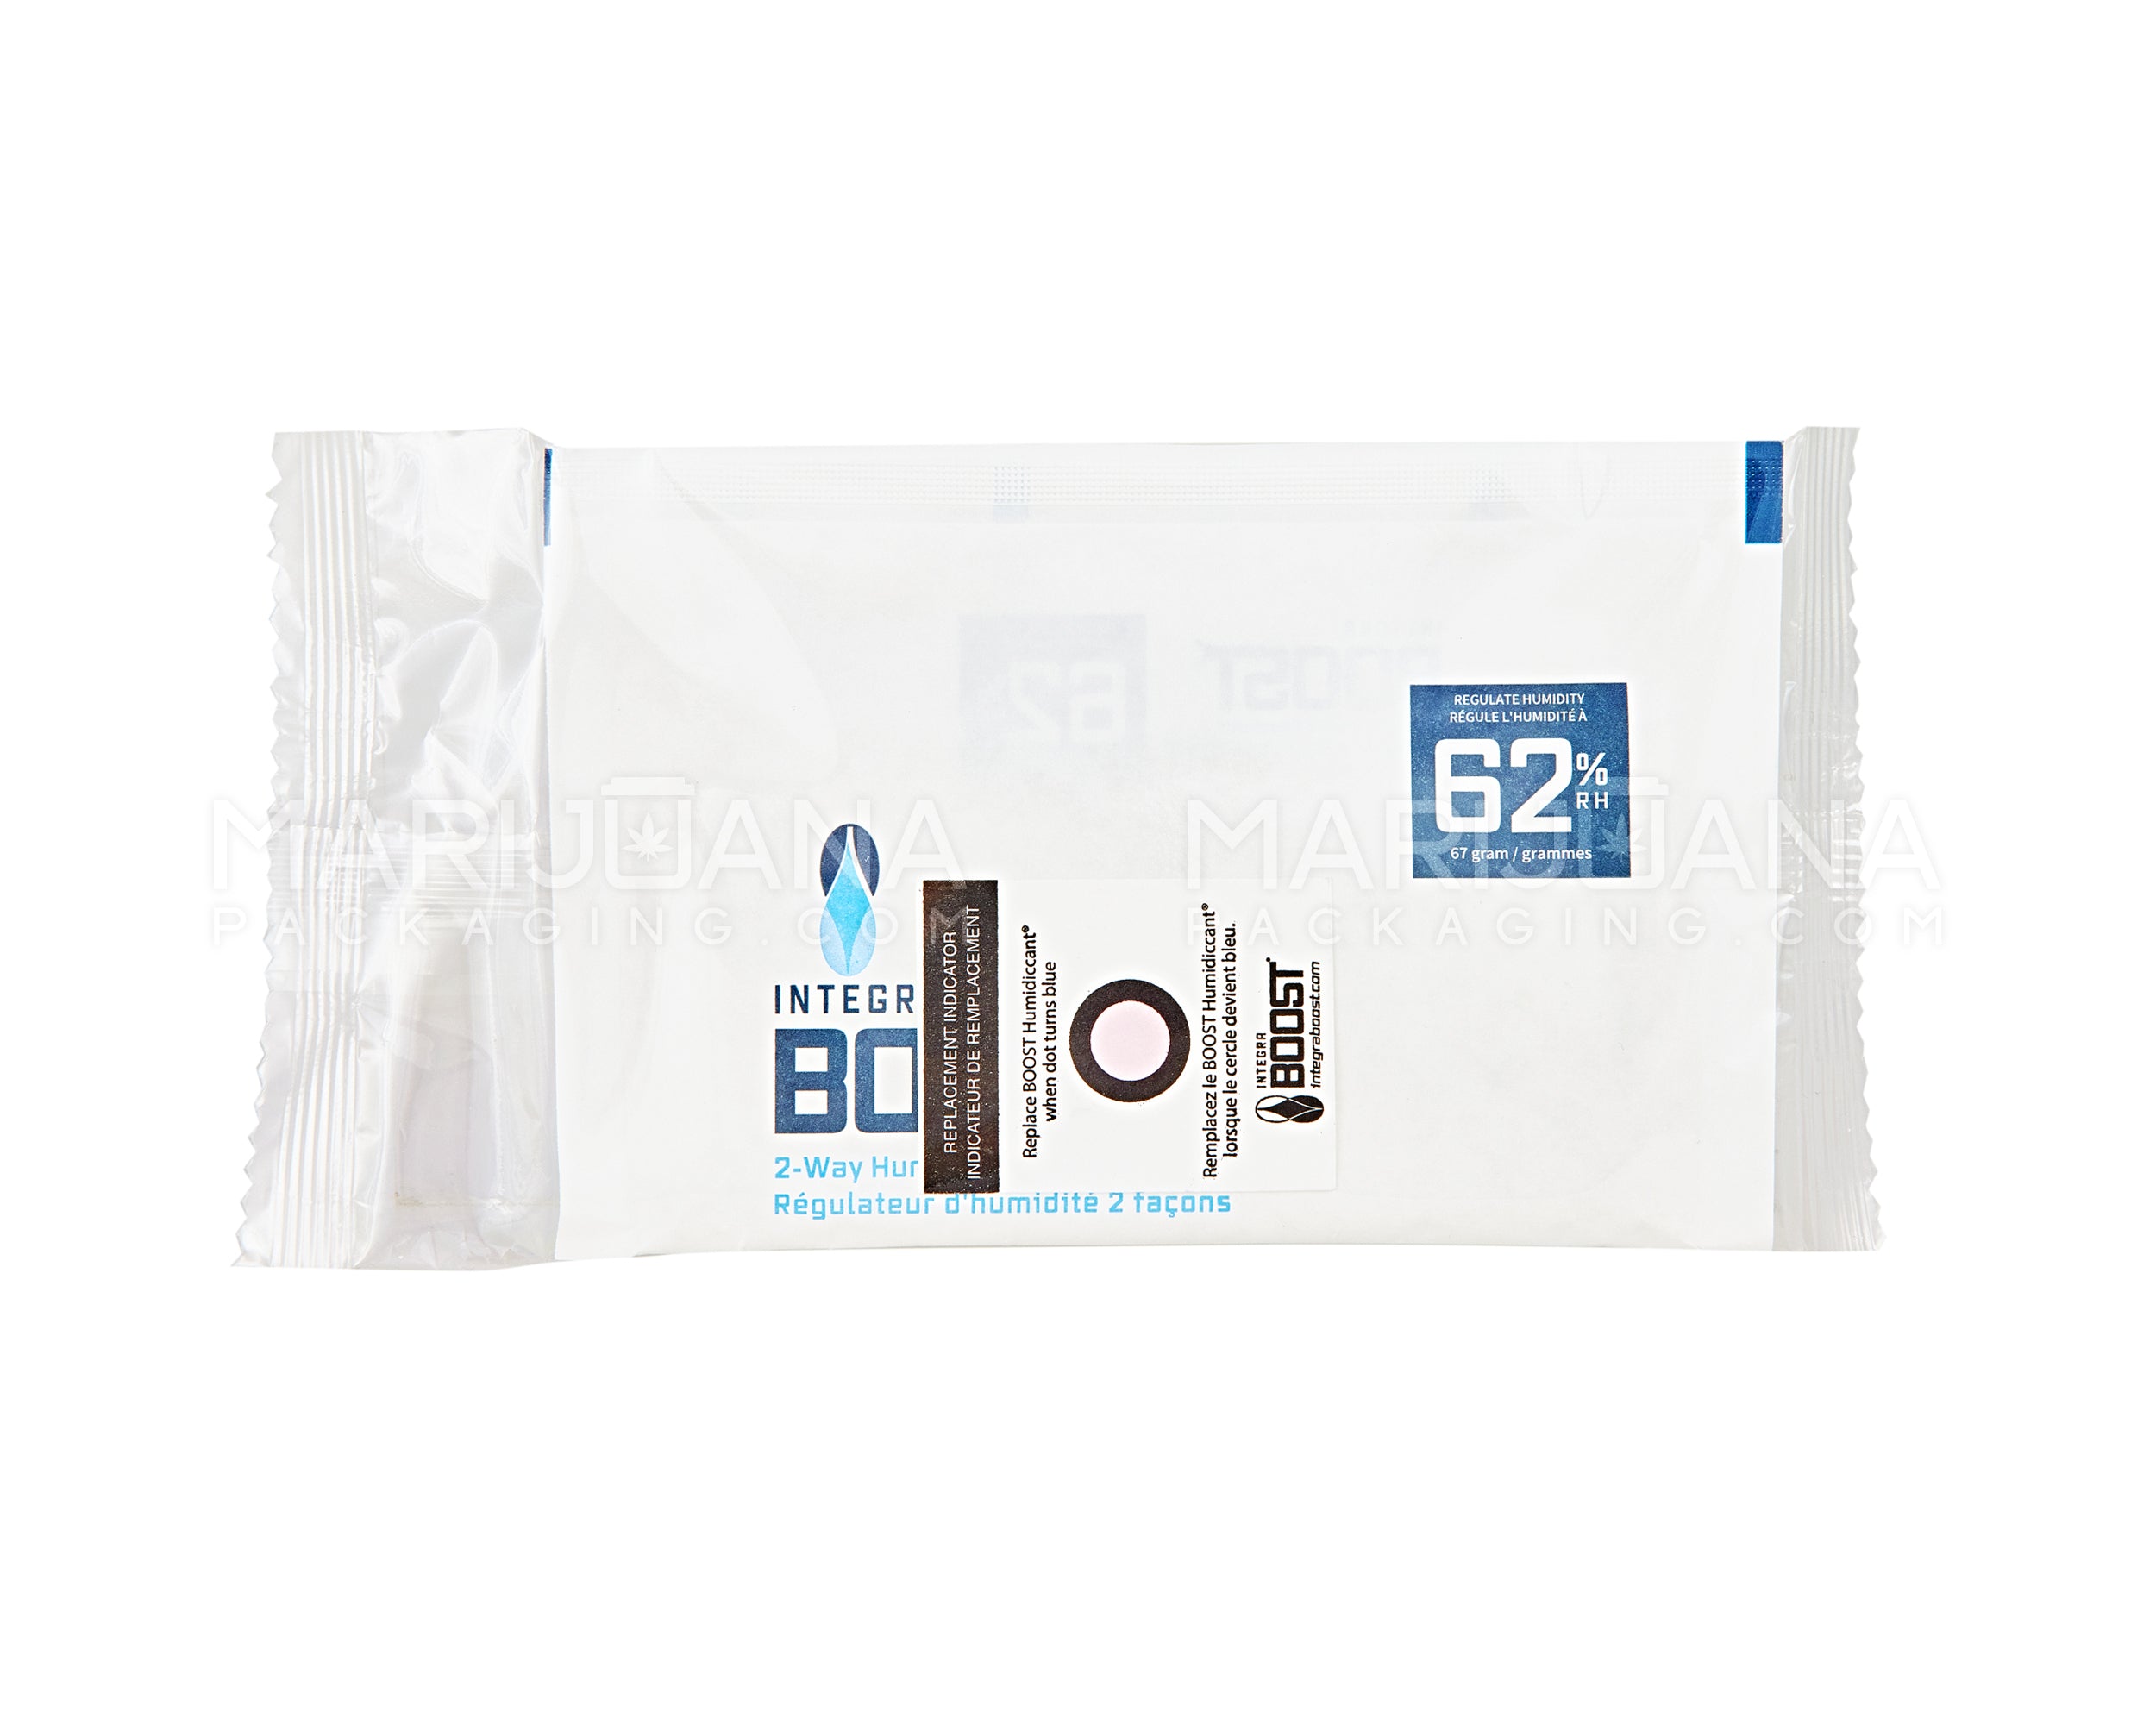 INTEGRA | Boost Humidity Packs | 67 Grams - 62% - 24 Count